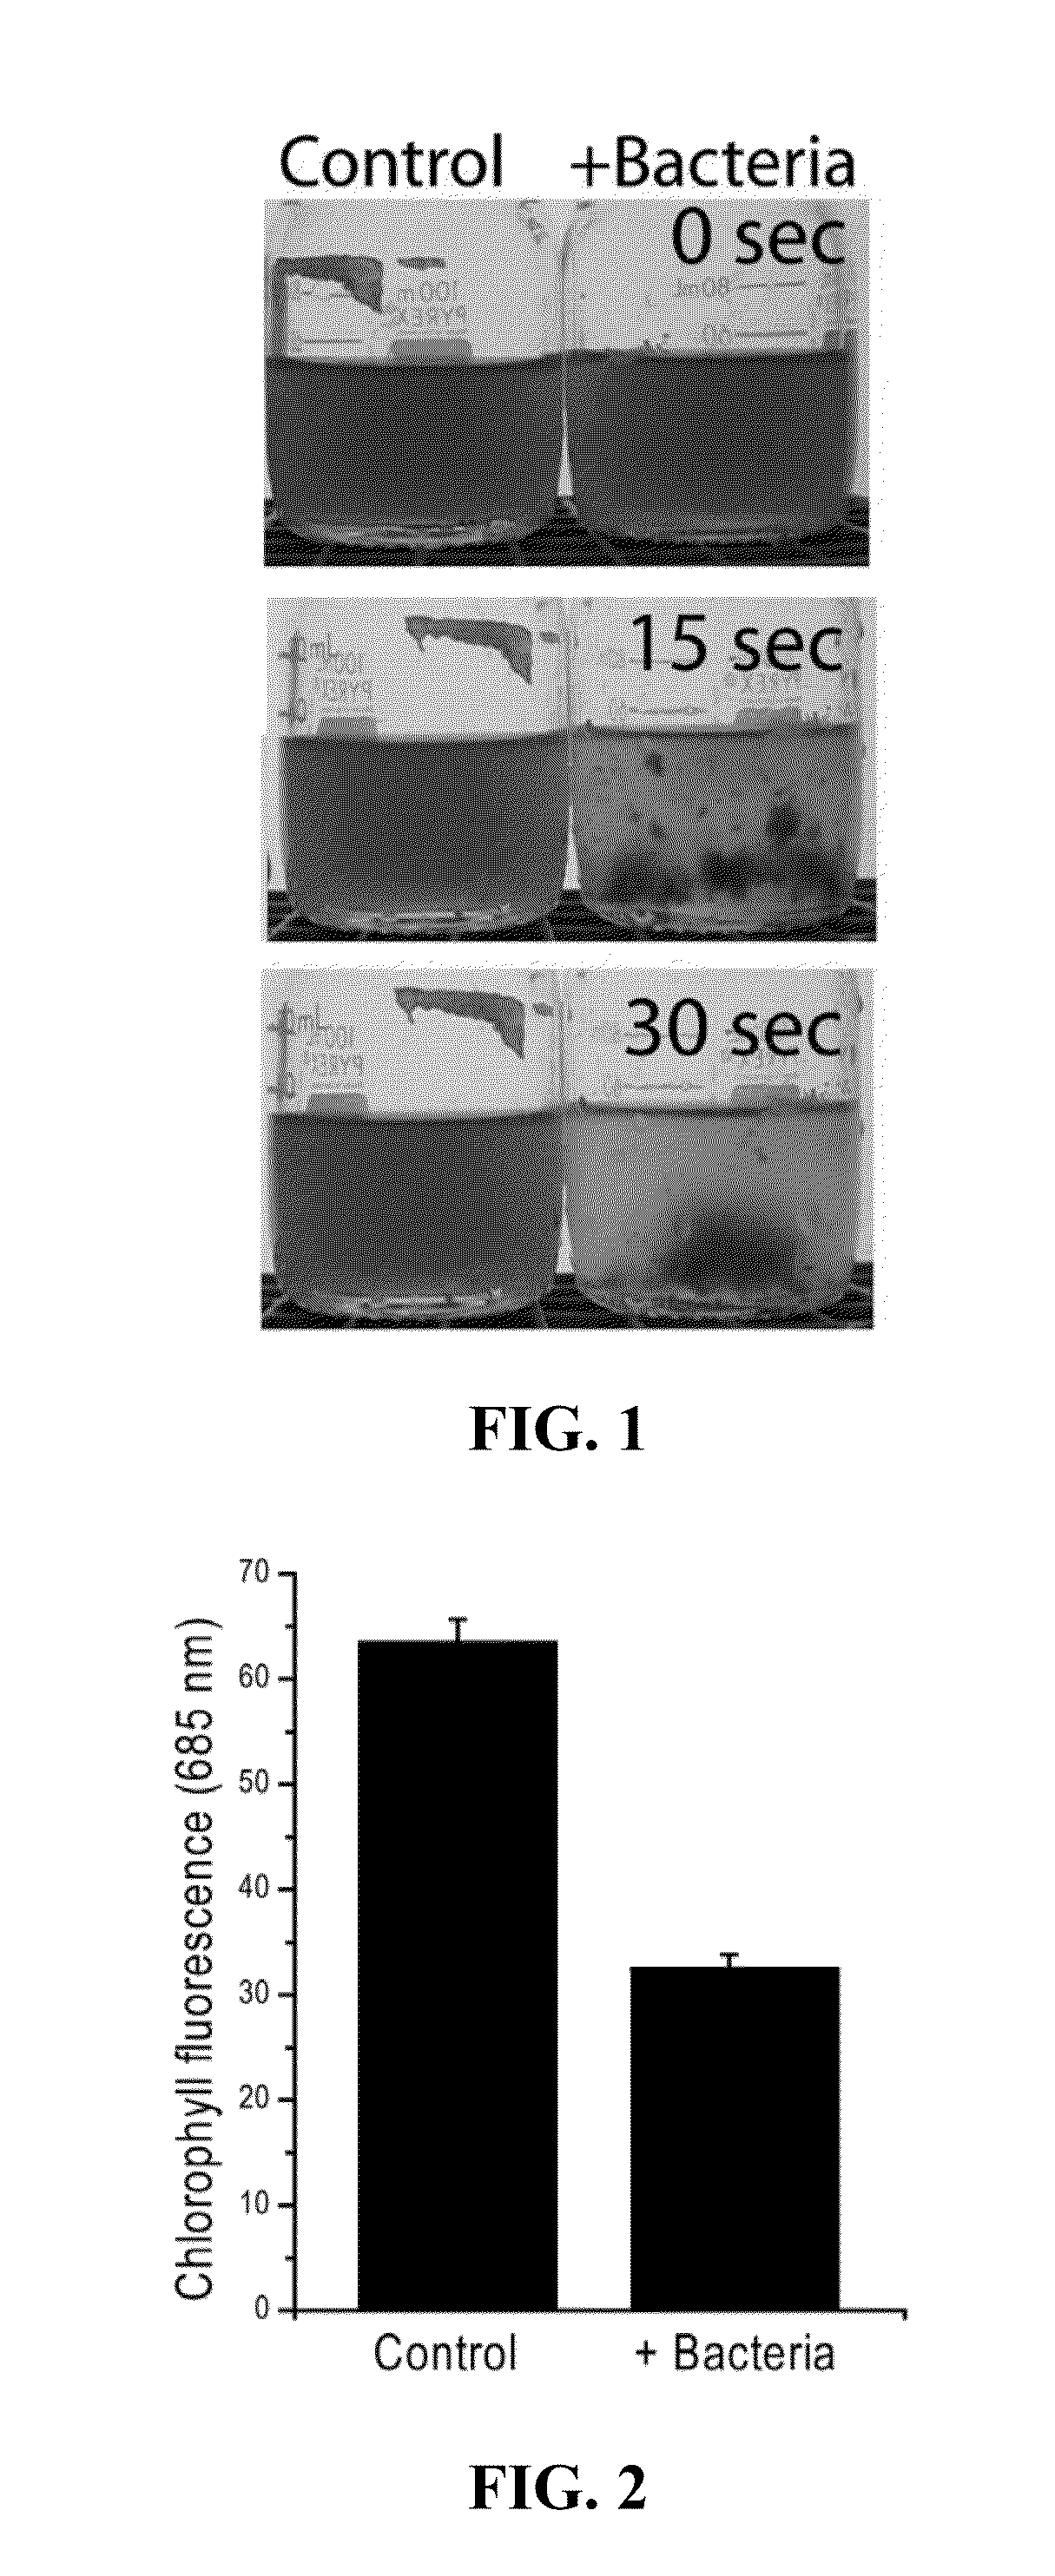 Compositions and Methods for Collecting Algae